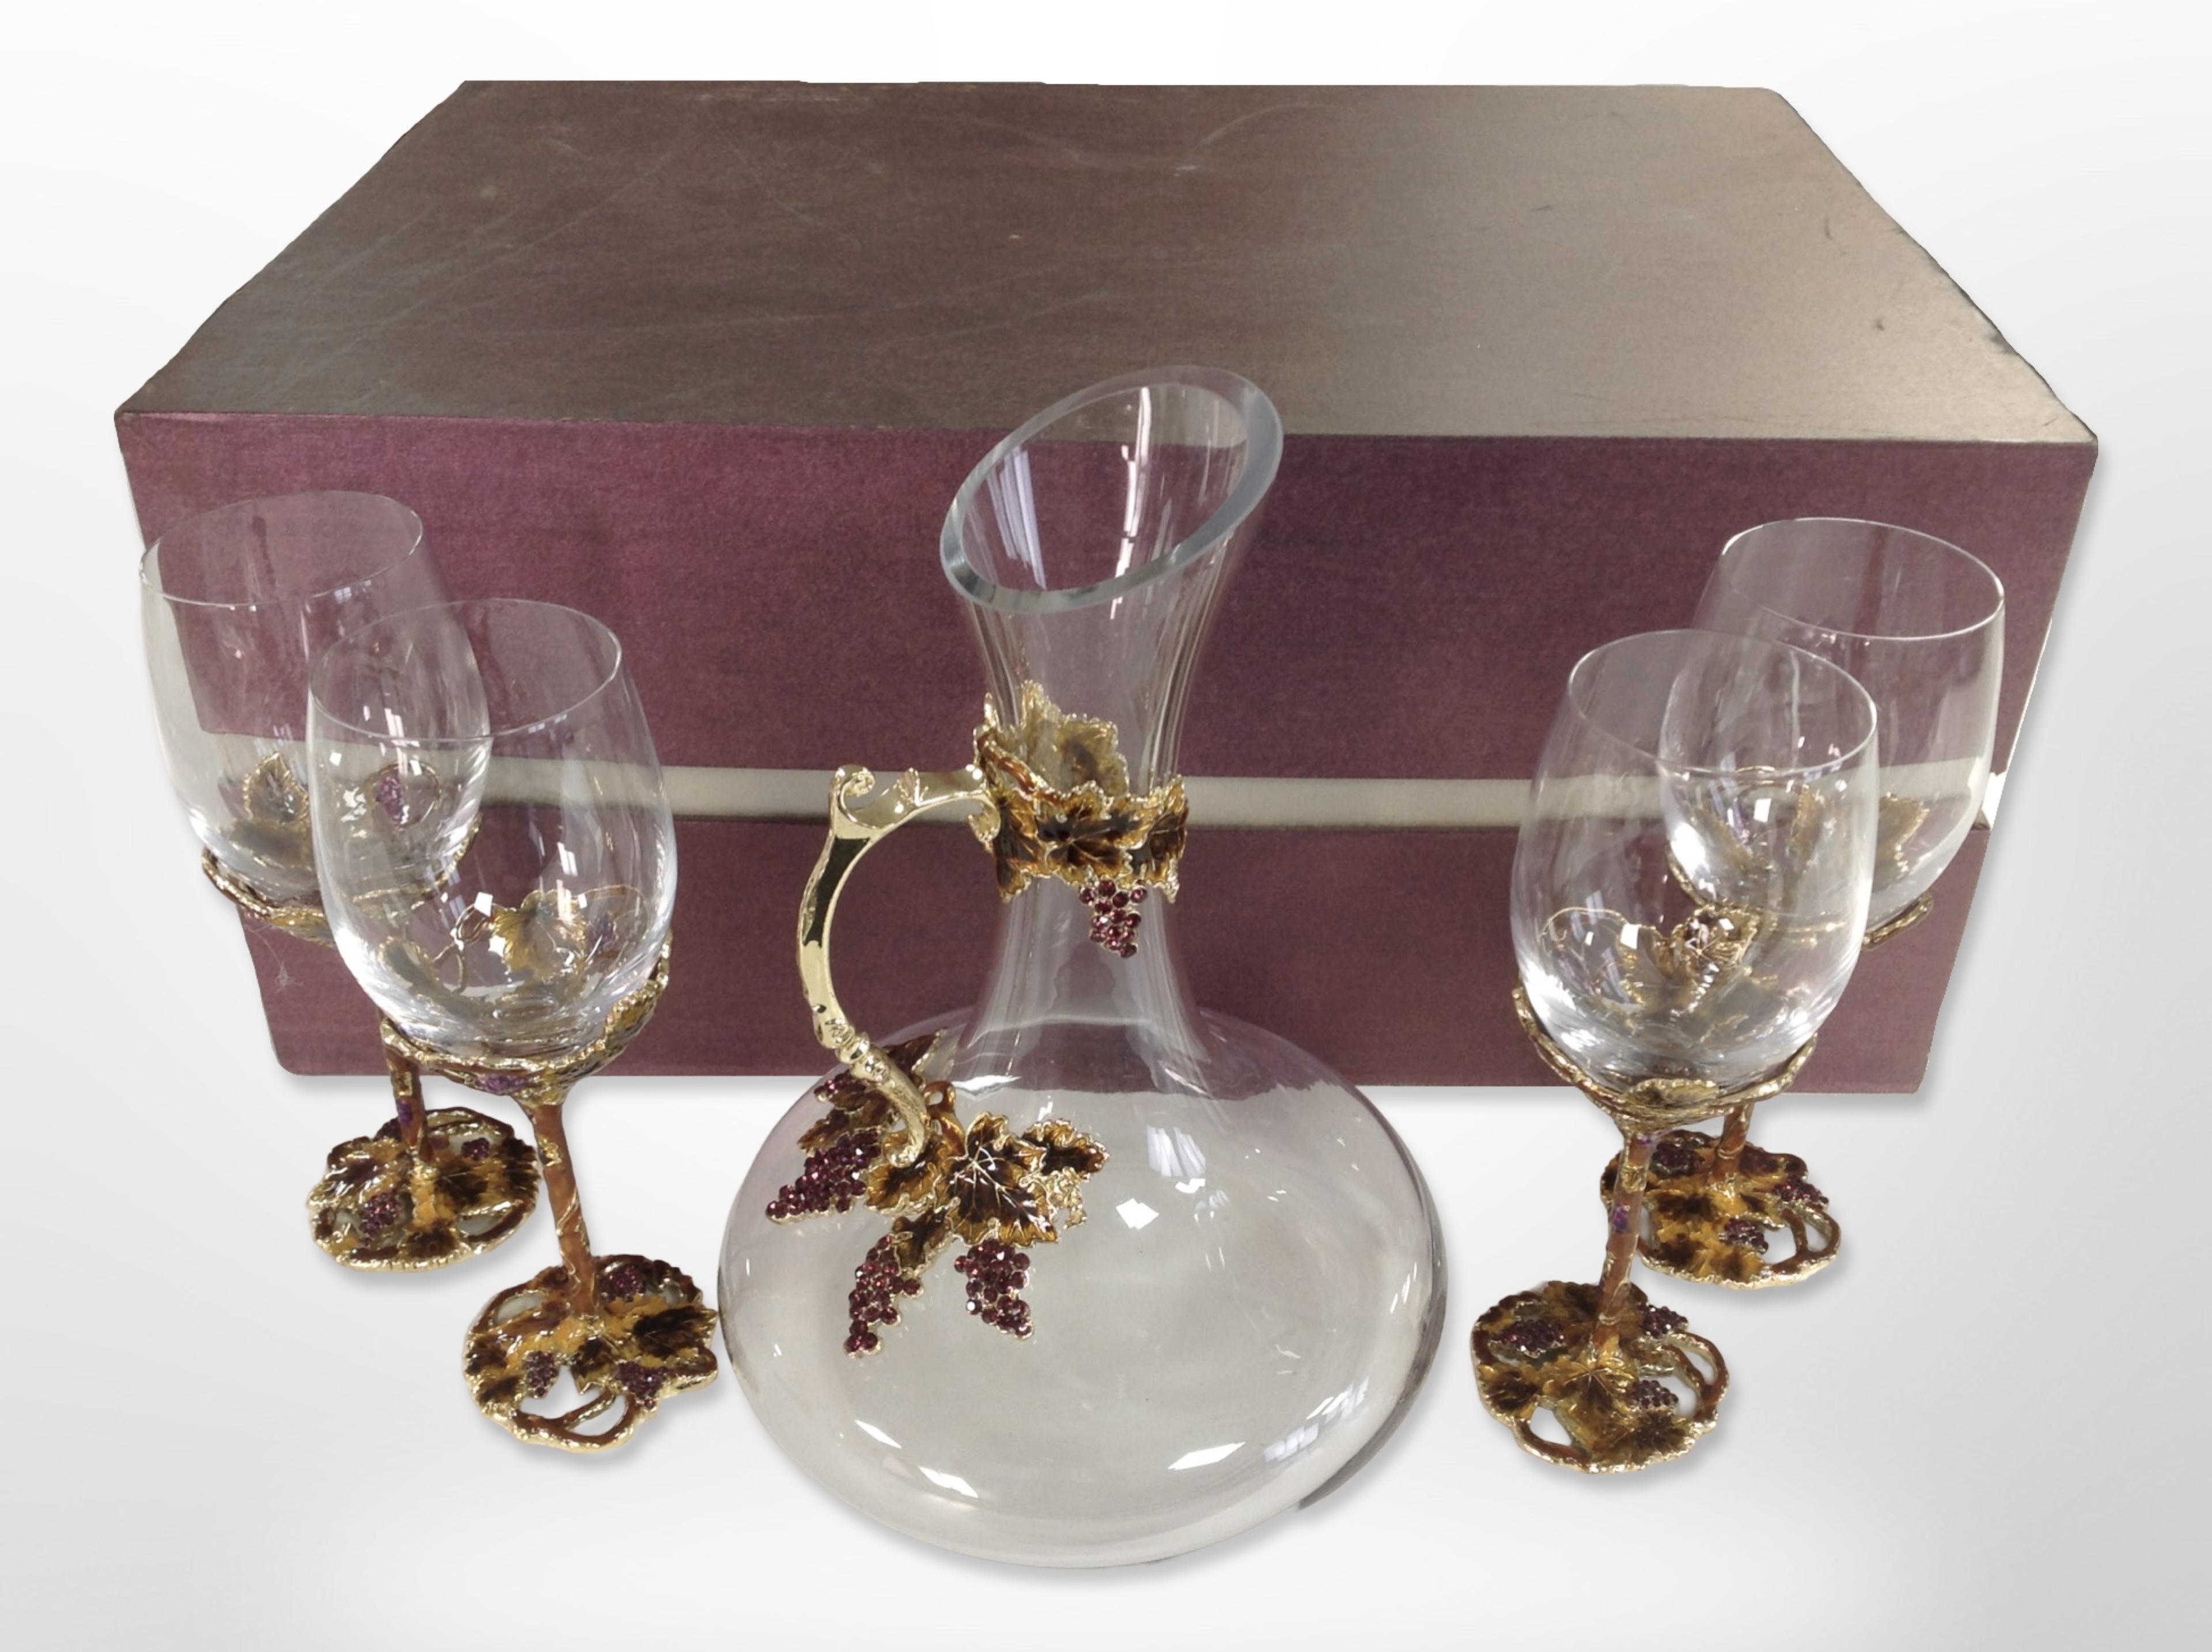 A set of four contemporary crystal and enamelled metal grape and leaf pattern wine glasses with